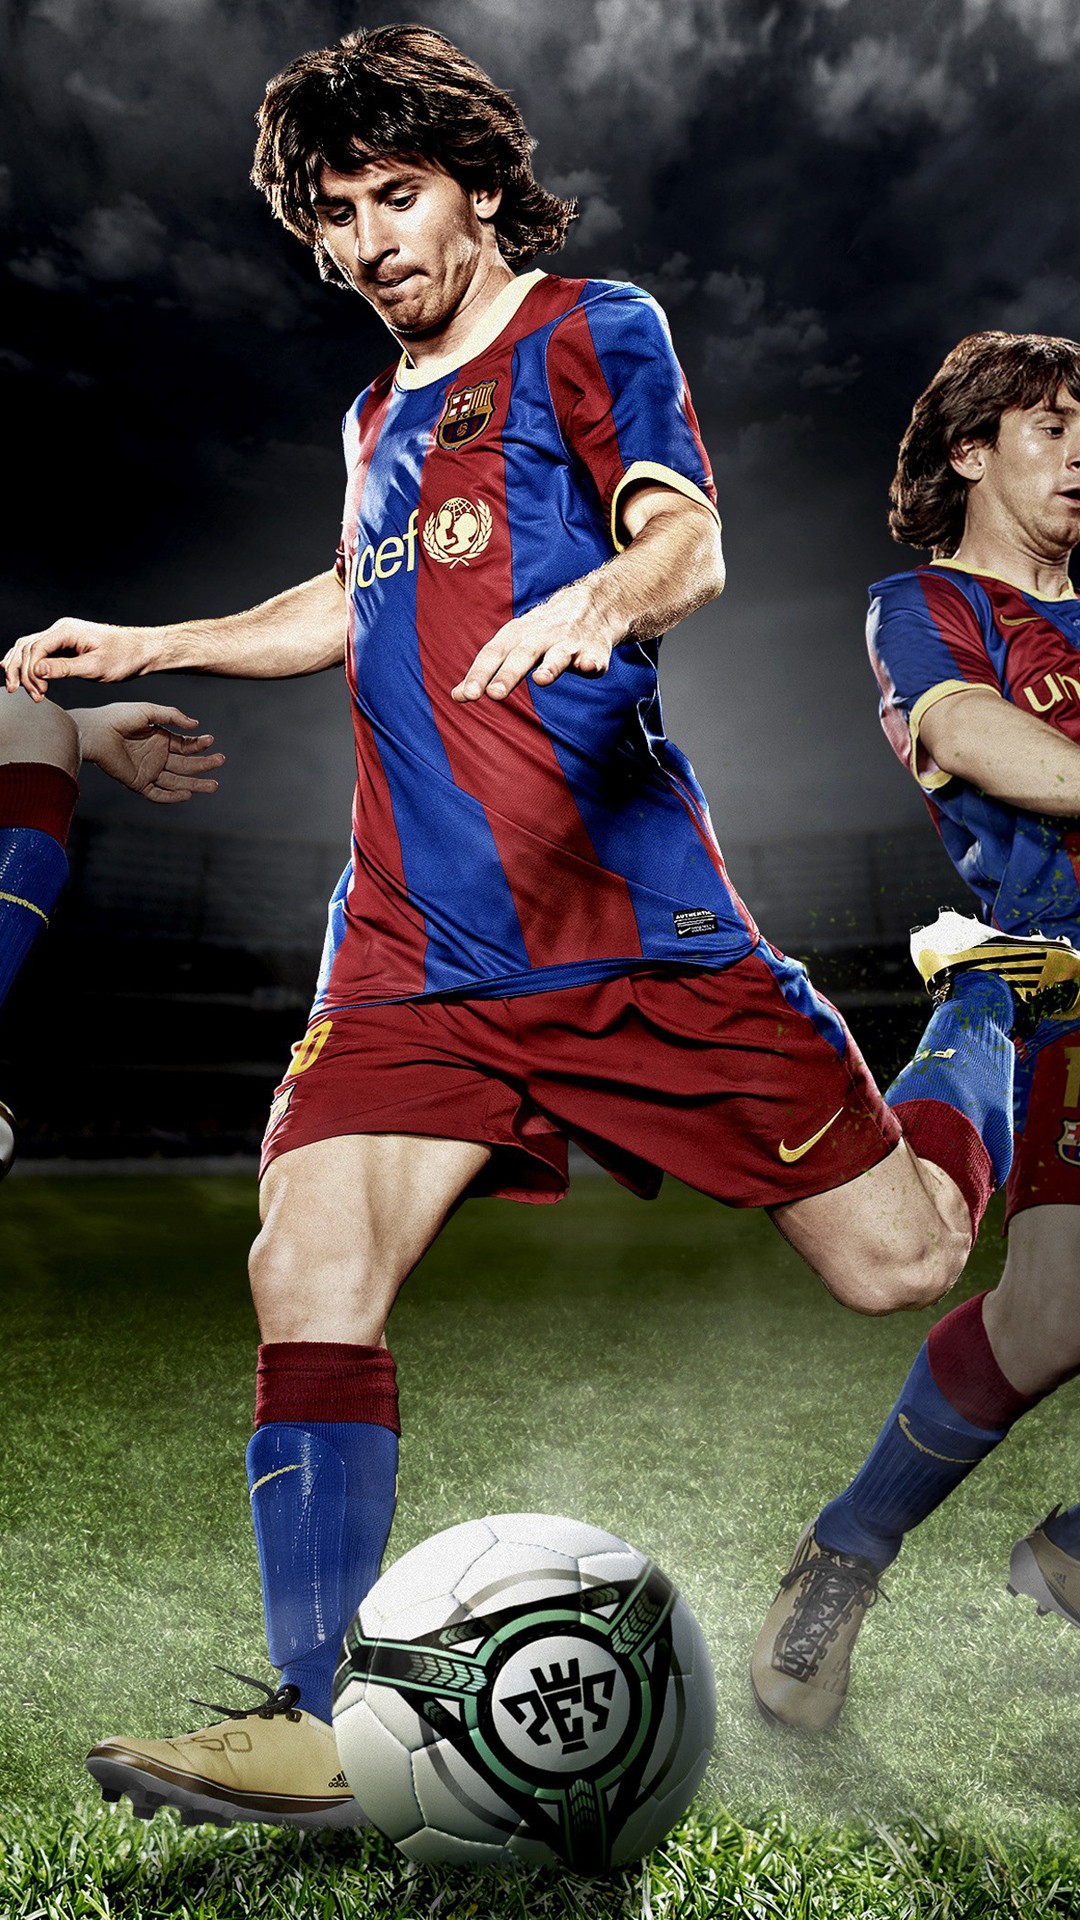 soccer player wallpapers,soccer player,football player,player,football,team sport